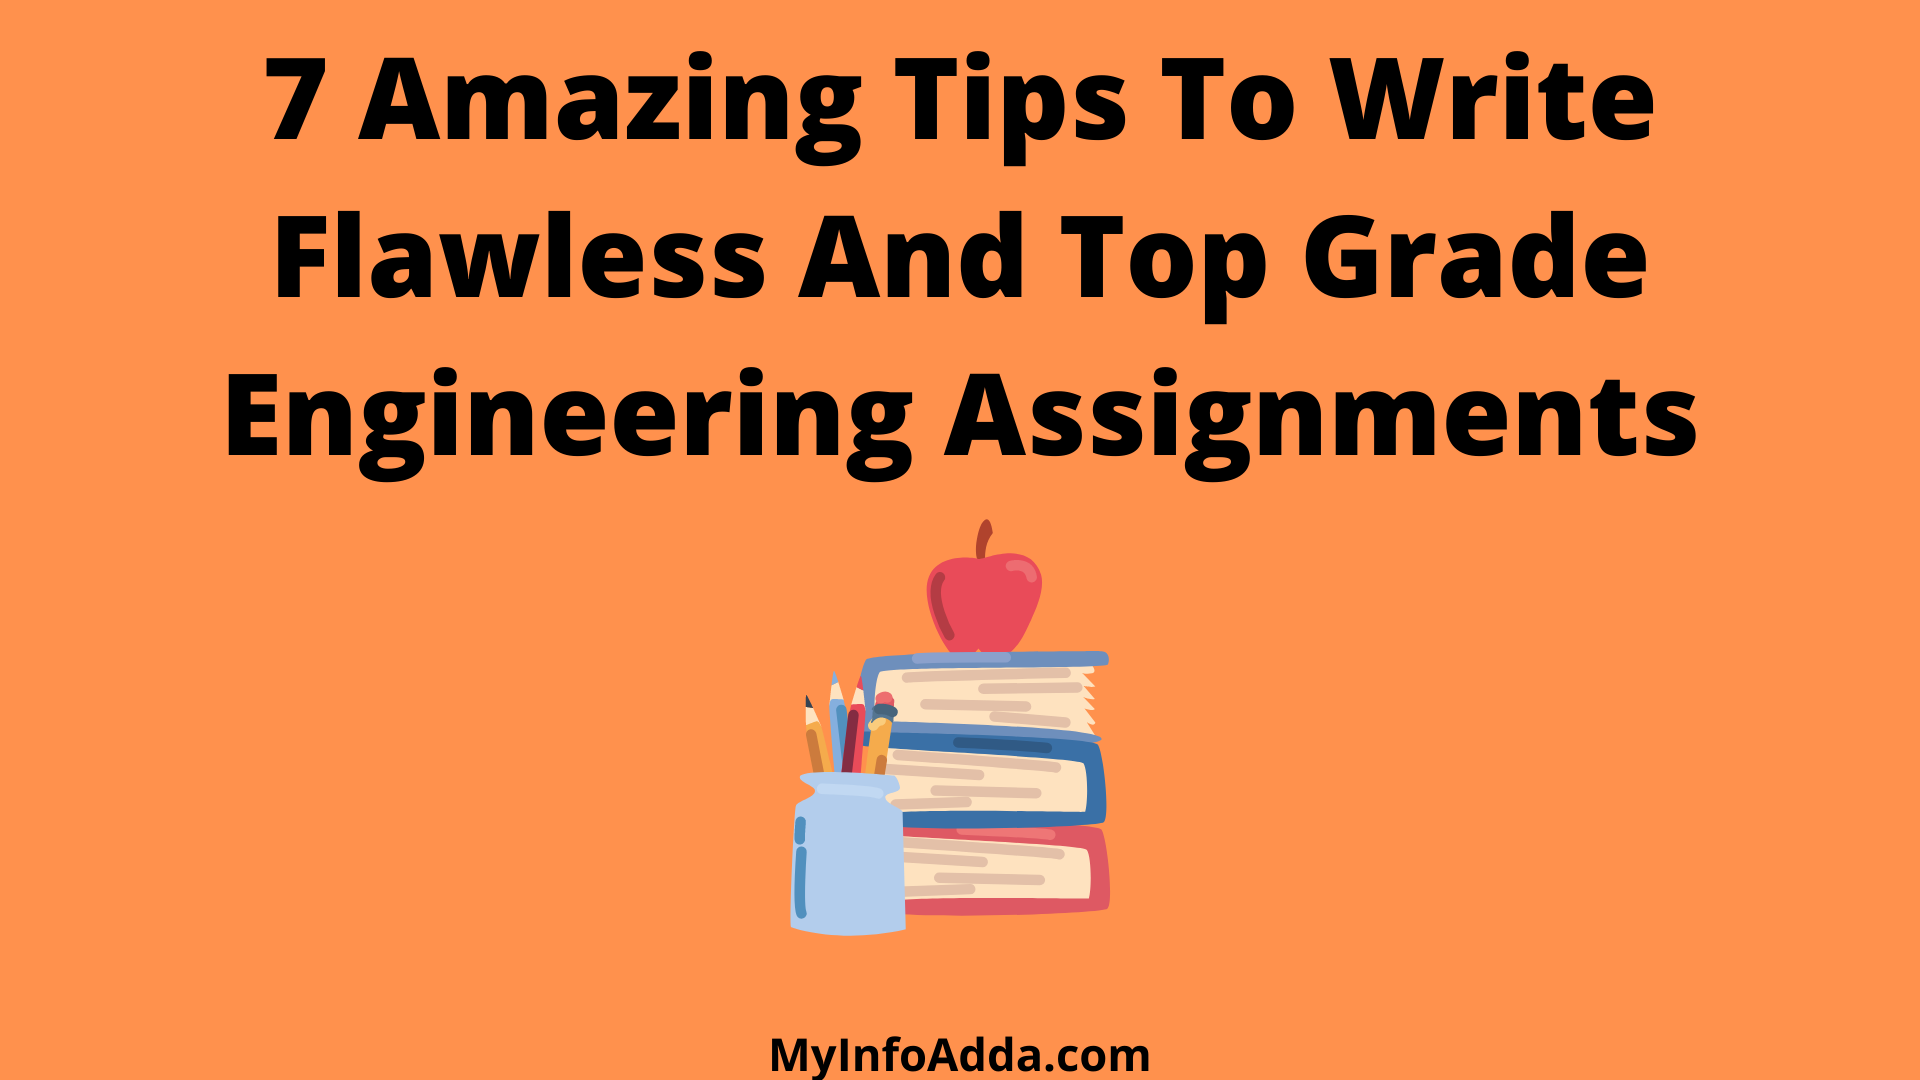 7 Amazing Tips To Write Flawless And Top Grade Engineering Assignments